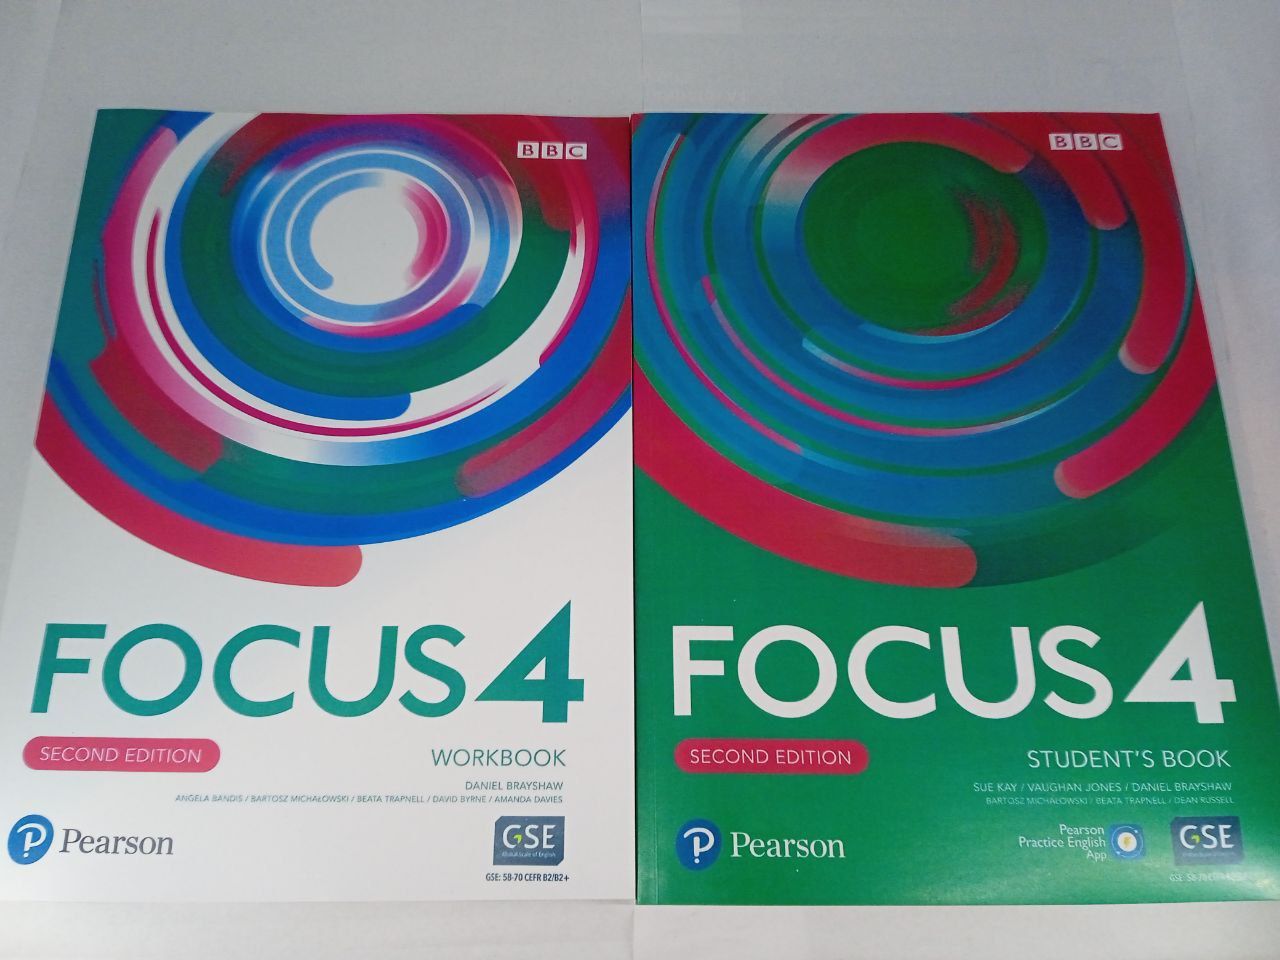 Focus 4 second edition students book workbook